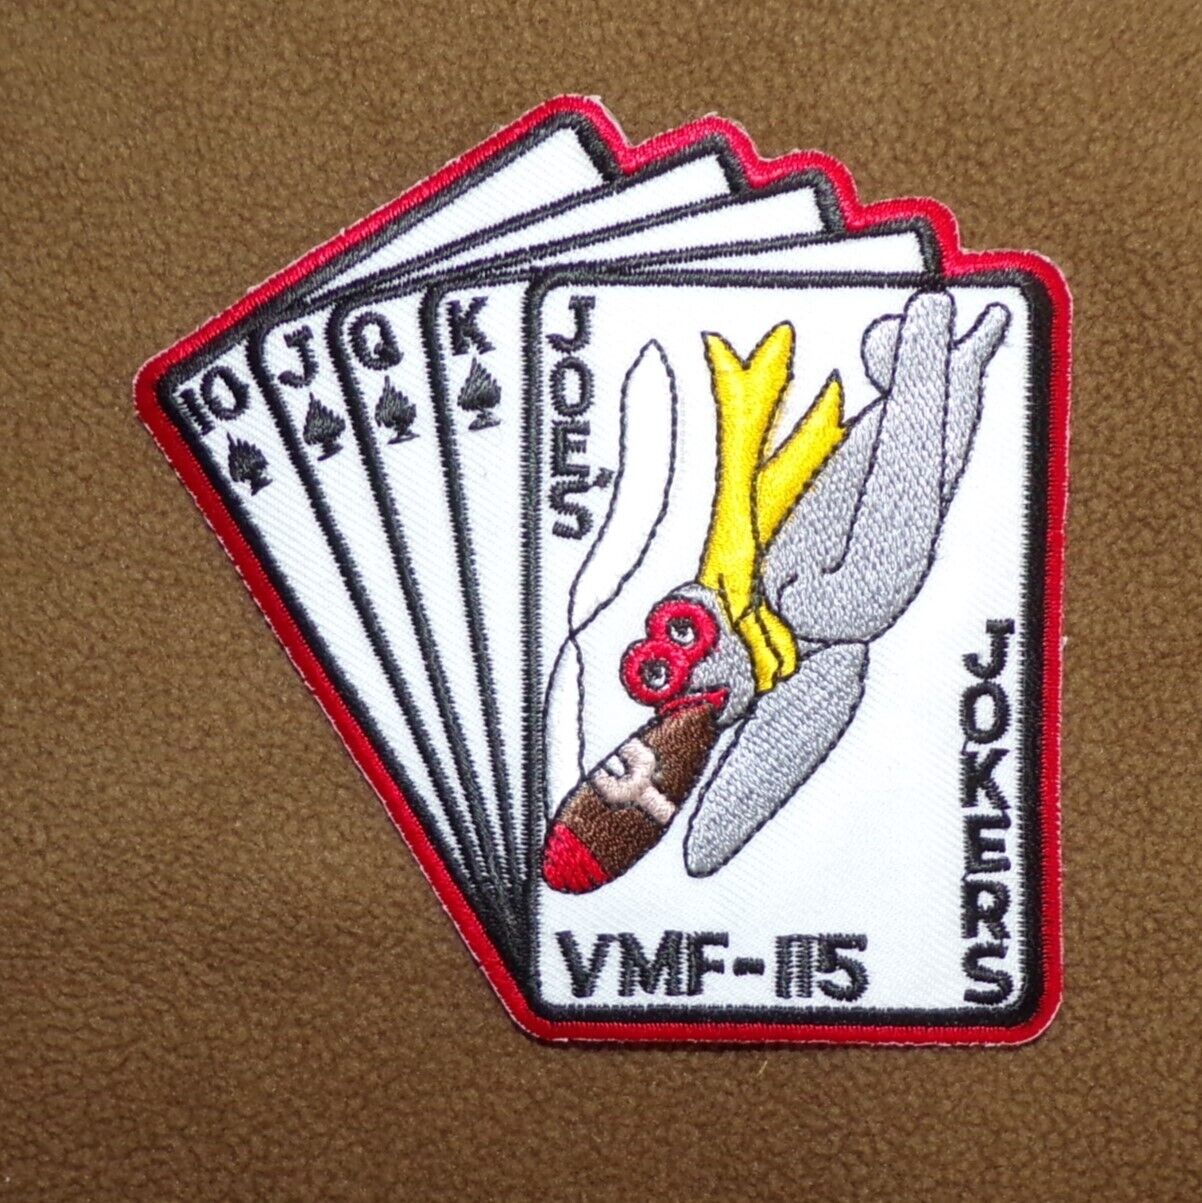 USMC VMF 115 Marine Fighter Squadron Embroidered Patch